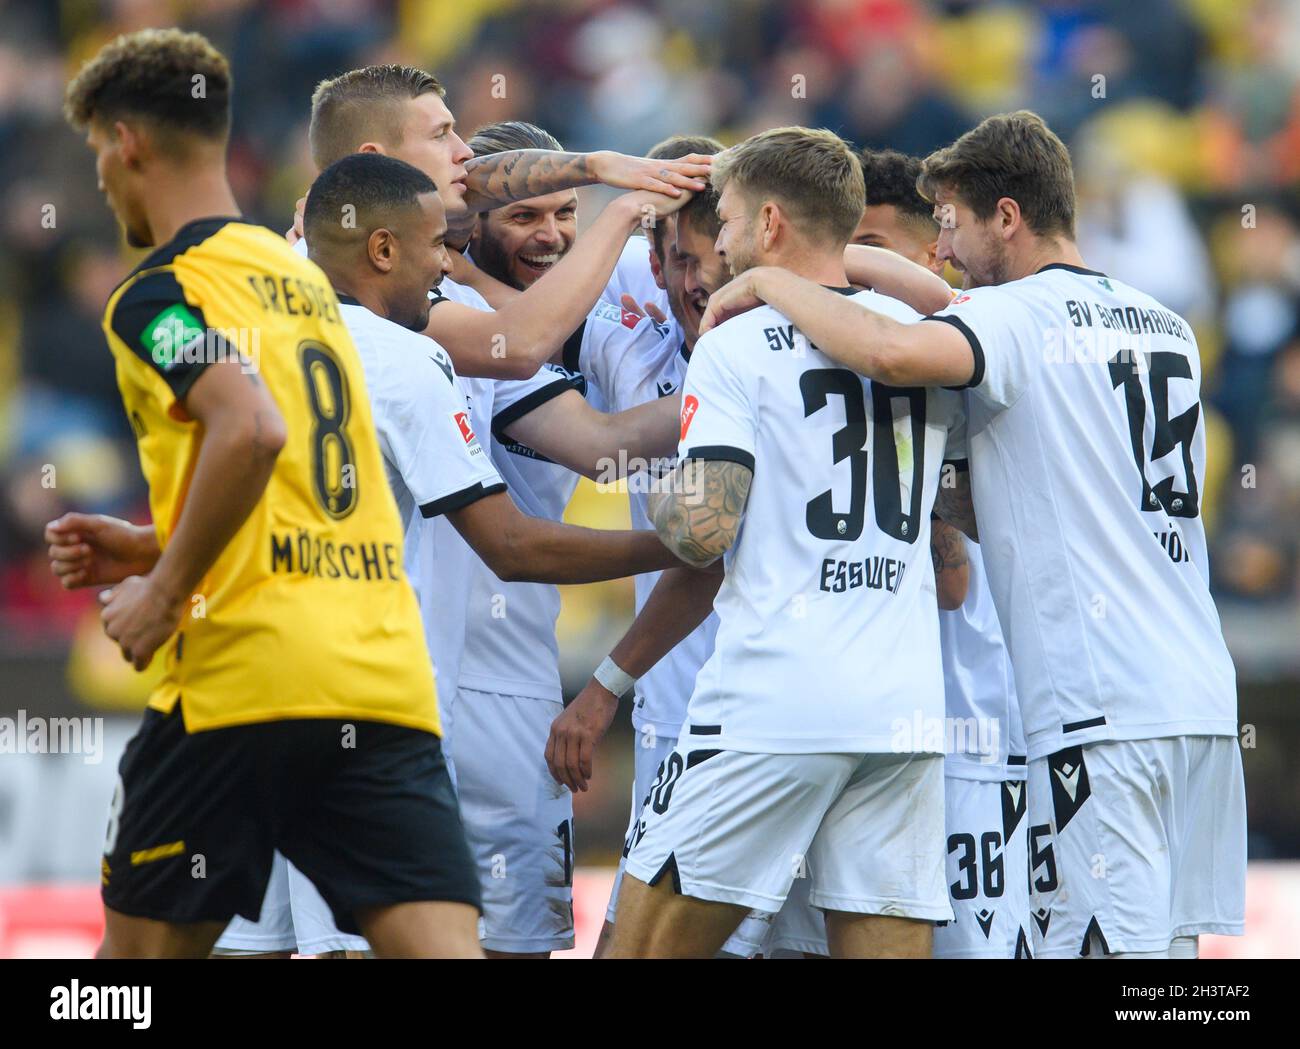 30 October 2021, Saxony, Dresden: Football: 2. Bundesliga, SG Dynamo Dresden - SV Sandhausen, Matchday 12, at Rudolf-Harbig-Stadion. Sandhausen's Pascal Testroet is cheered by his teammates after scoring the 0:1 goal while Dynamo's Heinz Mörschel (l) runs past. Photo: Robert Michael/dpa-Zentralbild/dpa - IMPORTANT NOTE: In accordance with the regulations of the DFL Deutsche Fußball Liga and/or the DFB Deutscher Fußball-Bund, it is prohibited to use or have used photographs taken in the stadium and/or of the match in the form of sequence pictures and/or video-like photo series. Stock Photo